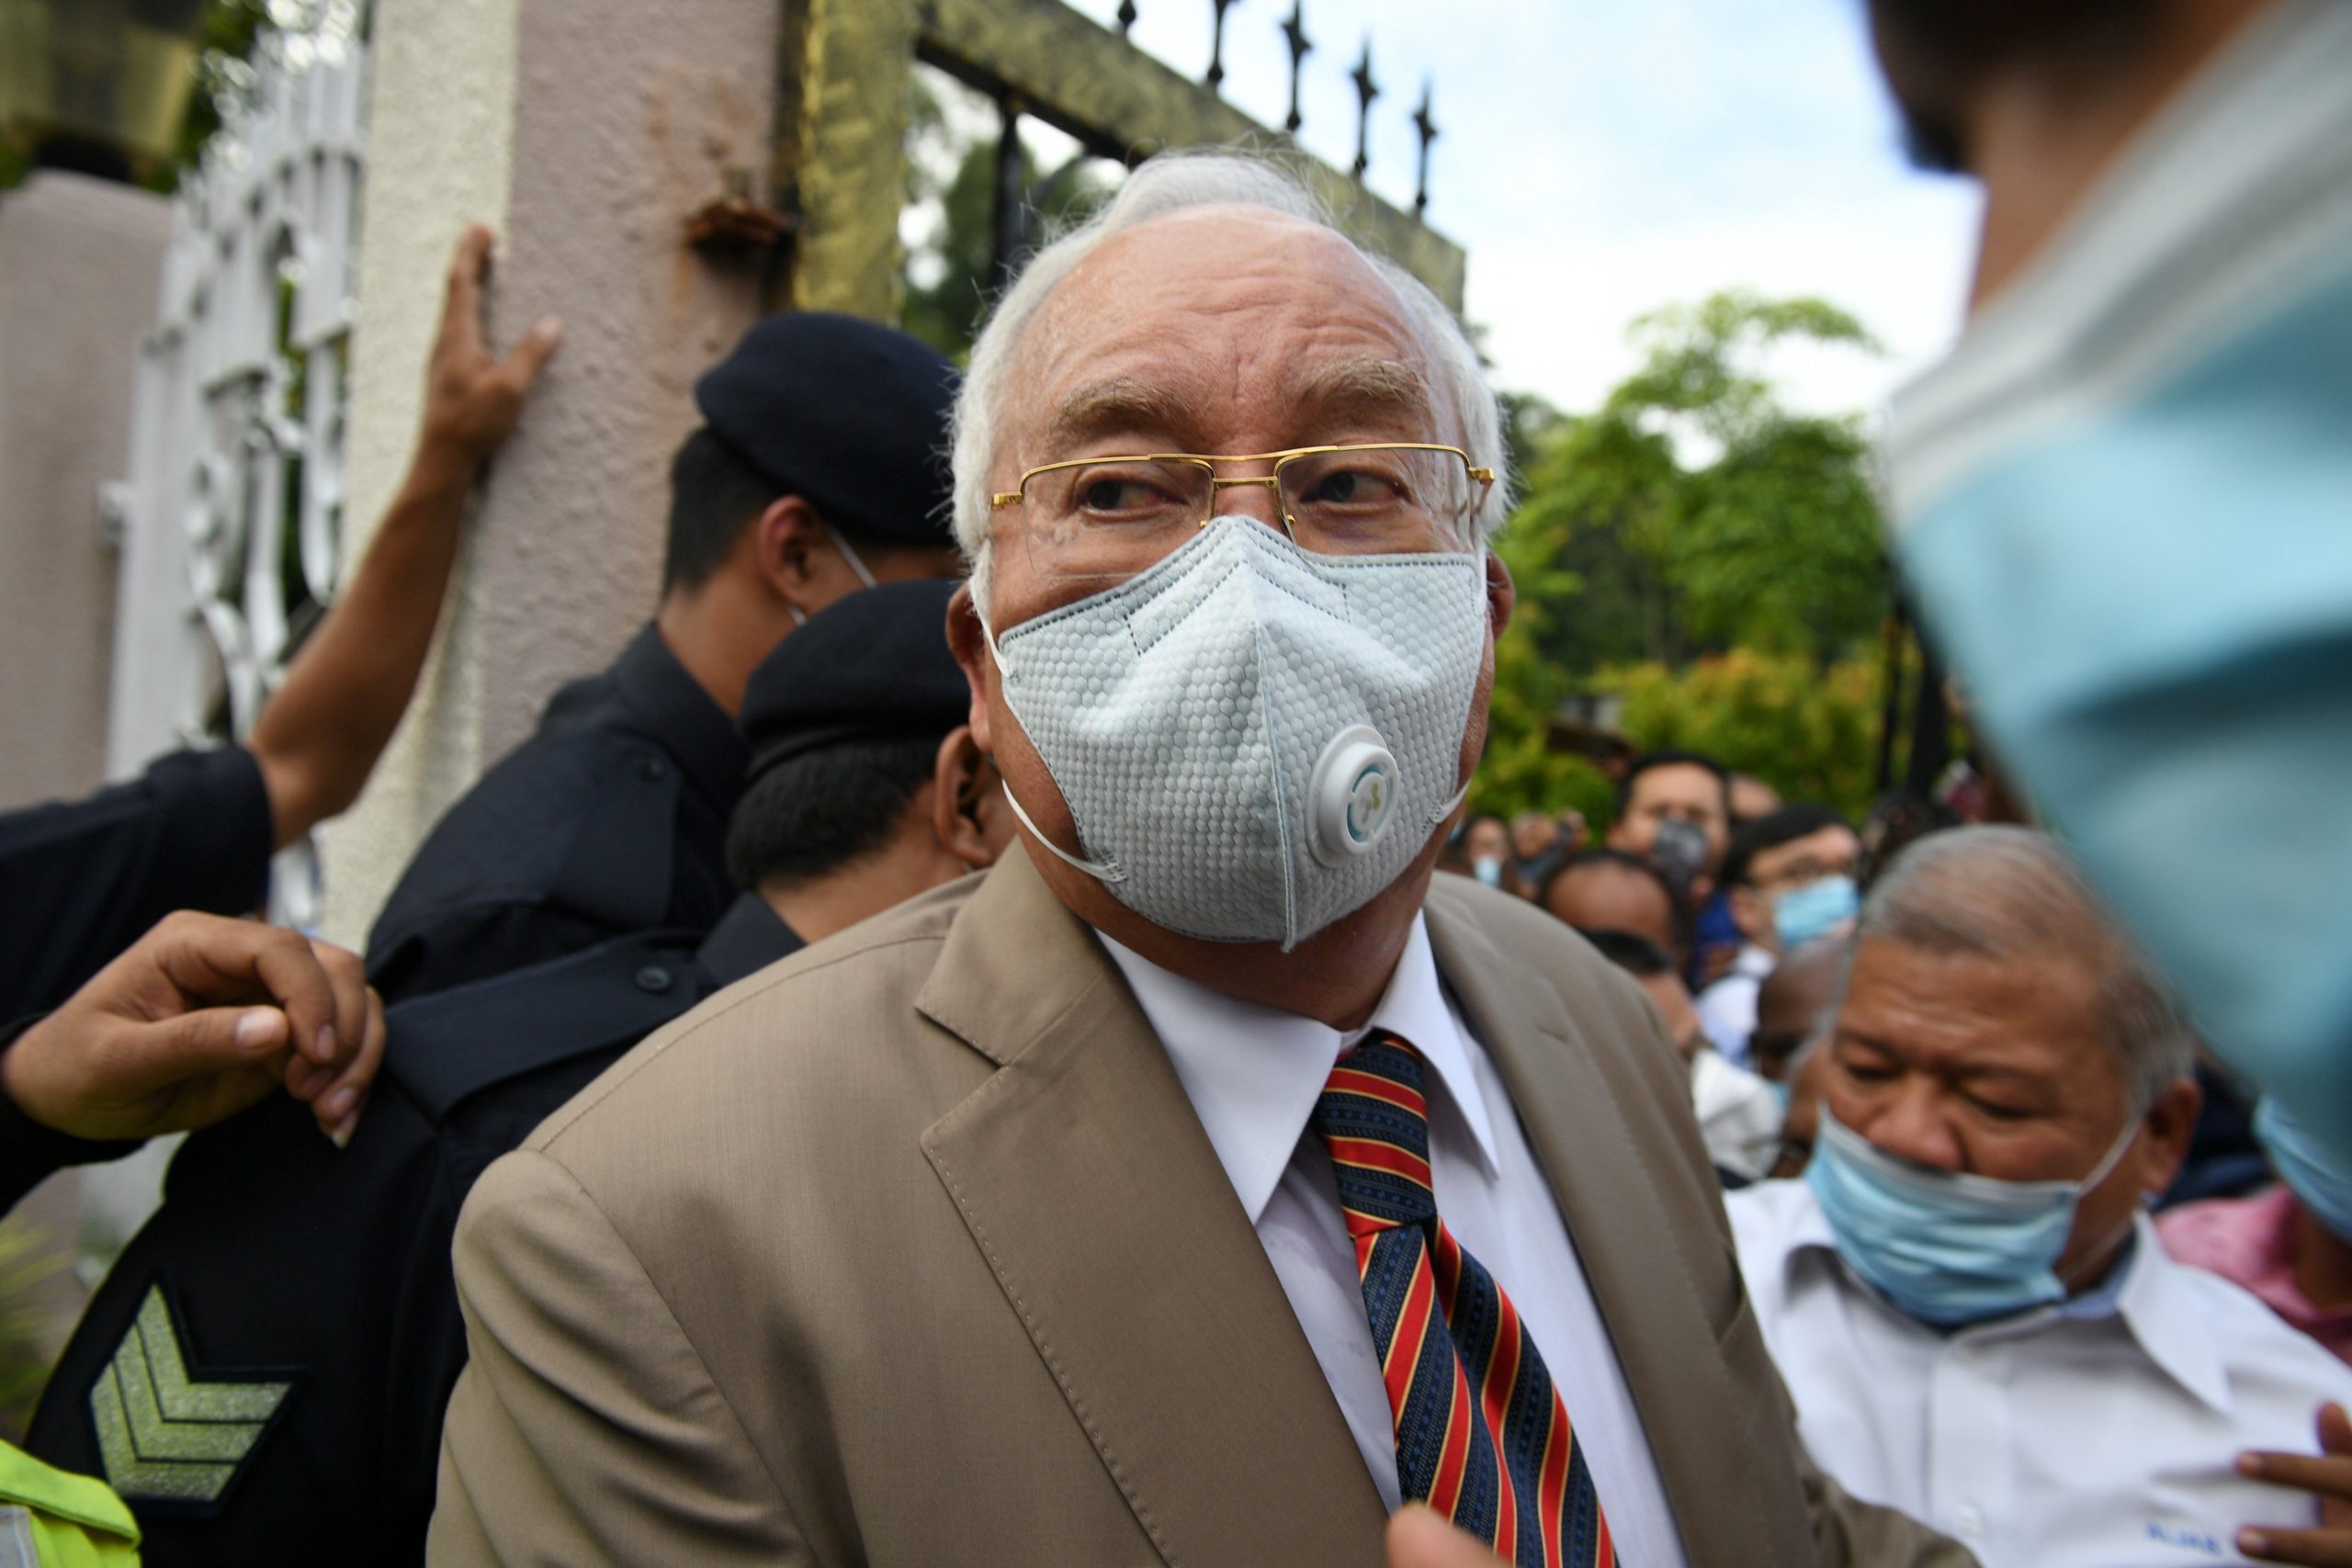 Malaysian ex-PM Najib Razak guilty of all charges in wealth fund fraud, faces decades in jail